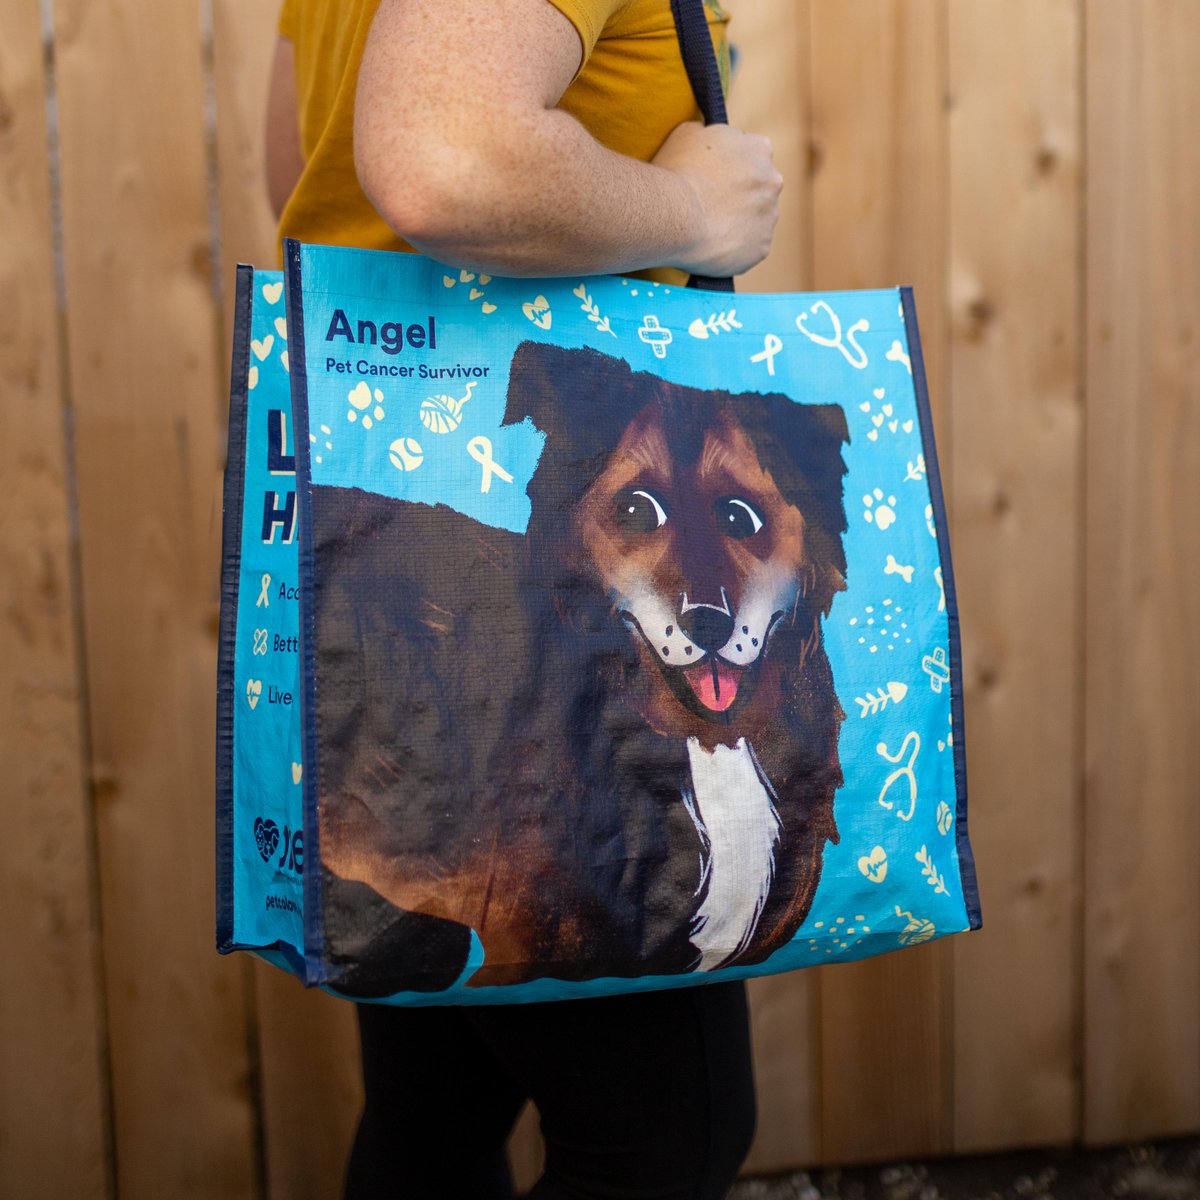 When Angel was diagnosed with pet cancer, the Petco Love & @bluebuffalo Pet Cancer Treatment Fund helped cover the cost of her treatment! When you donate $10+ at @Petco, you’ll receive this free tote that helps make care accessible for pet families just like hers nationwide.🐾